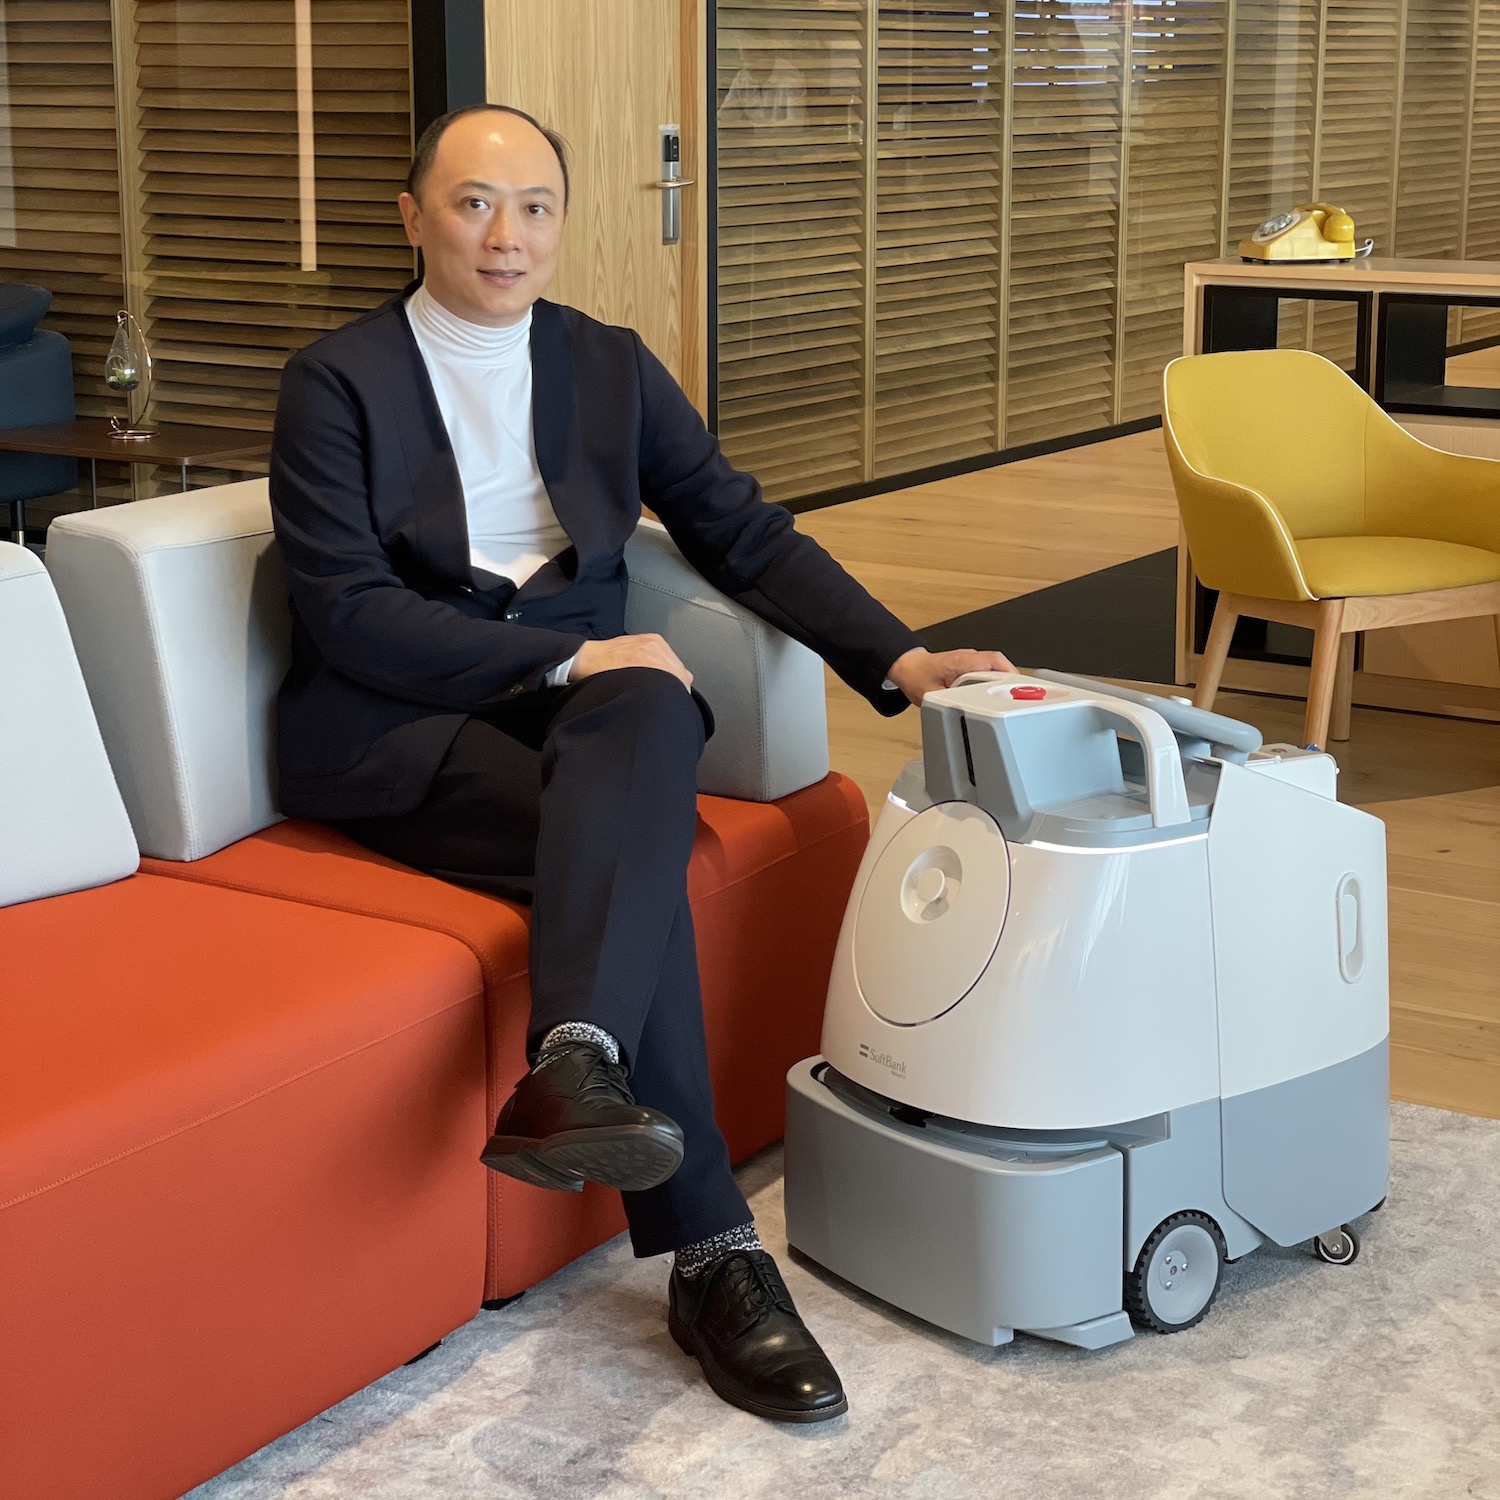 Robotics is revolutionising cleaning, public safety in pandemic era